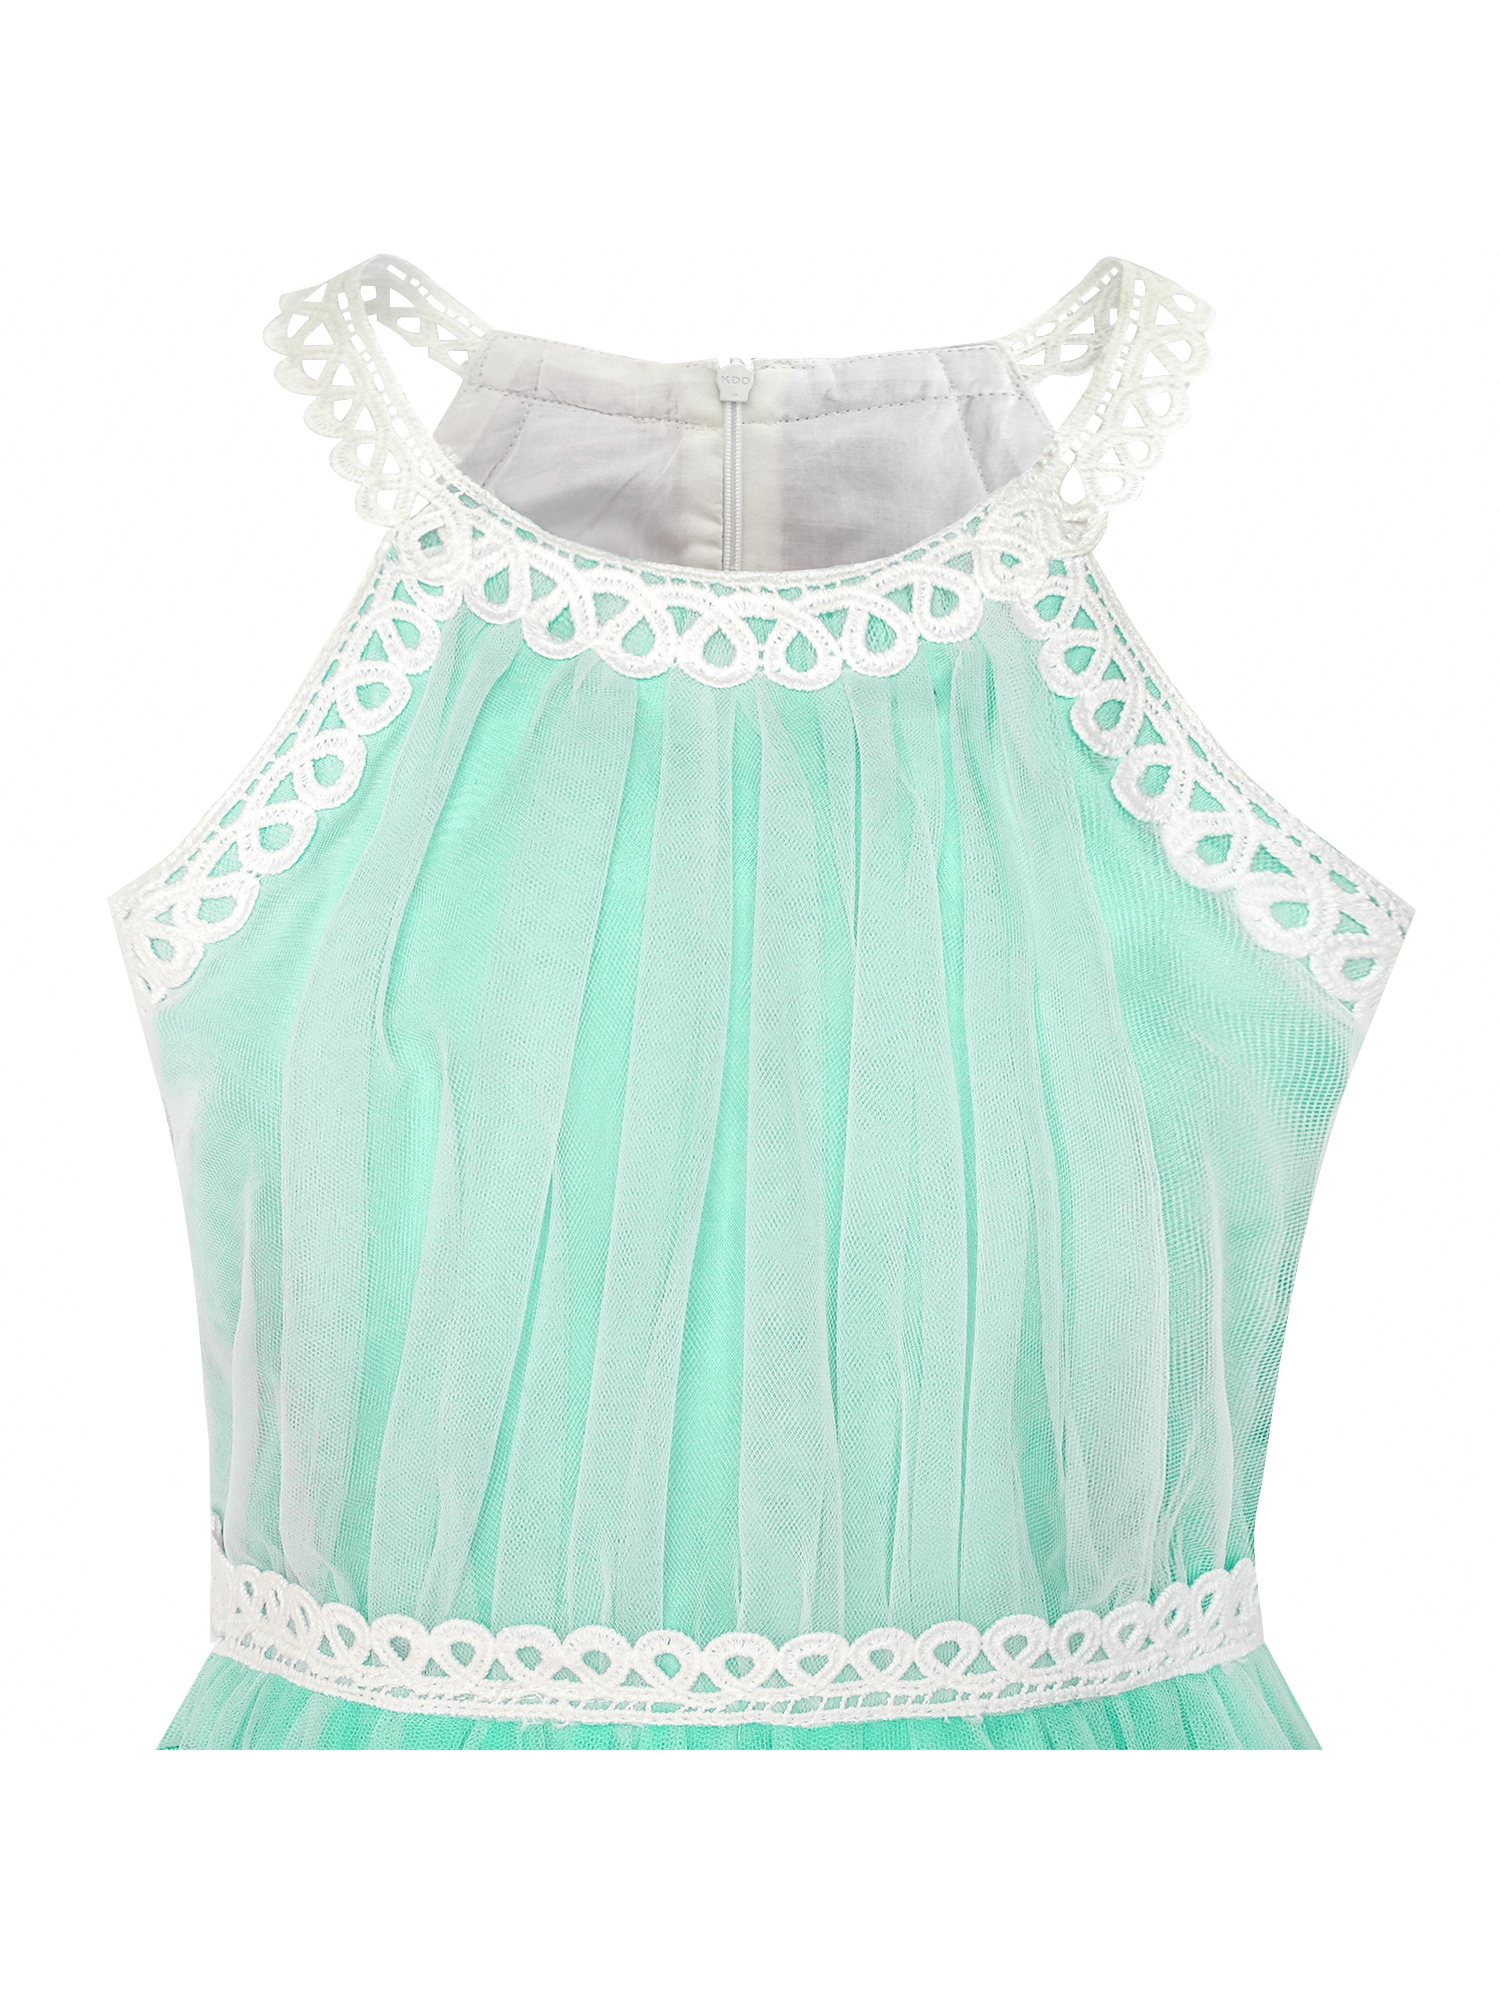 Girls Dress Turquoise Butterfly Embroidered Halter Dress Party 5 - image 4 of 7